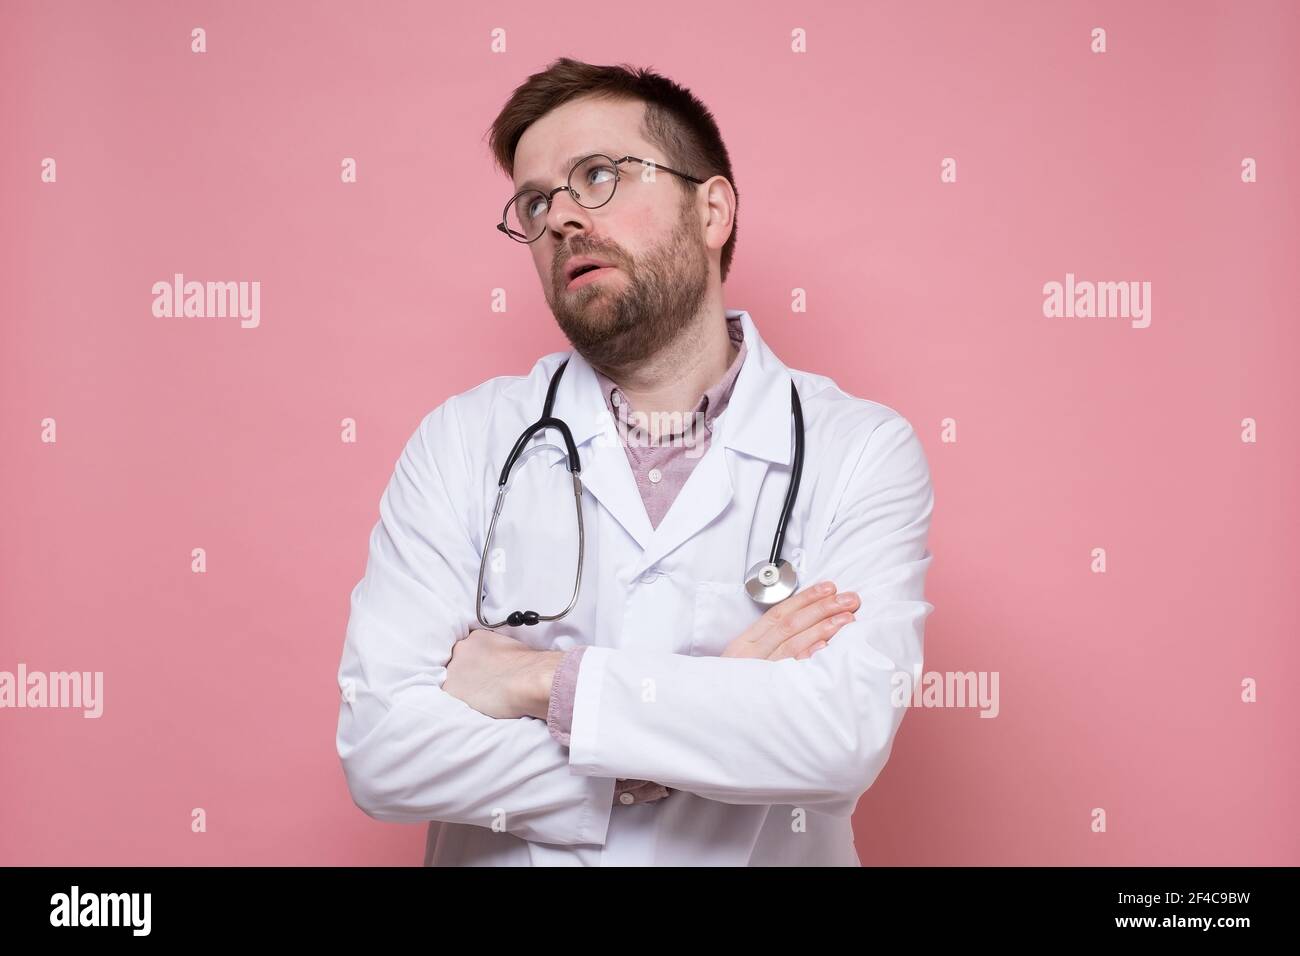 Tired male doctor in a white coat, with a stethoscope around neck, crossed arms and looked up apathetically. Pink background. Stock Photo